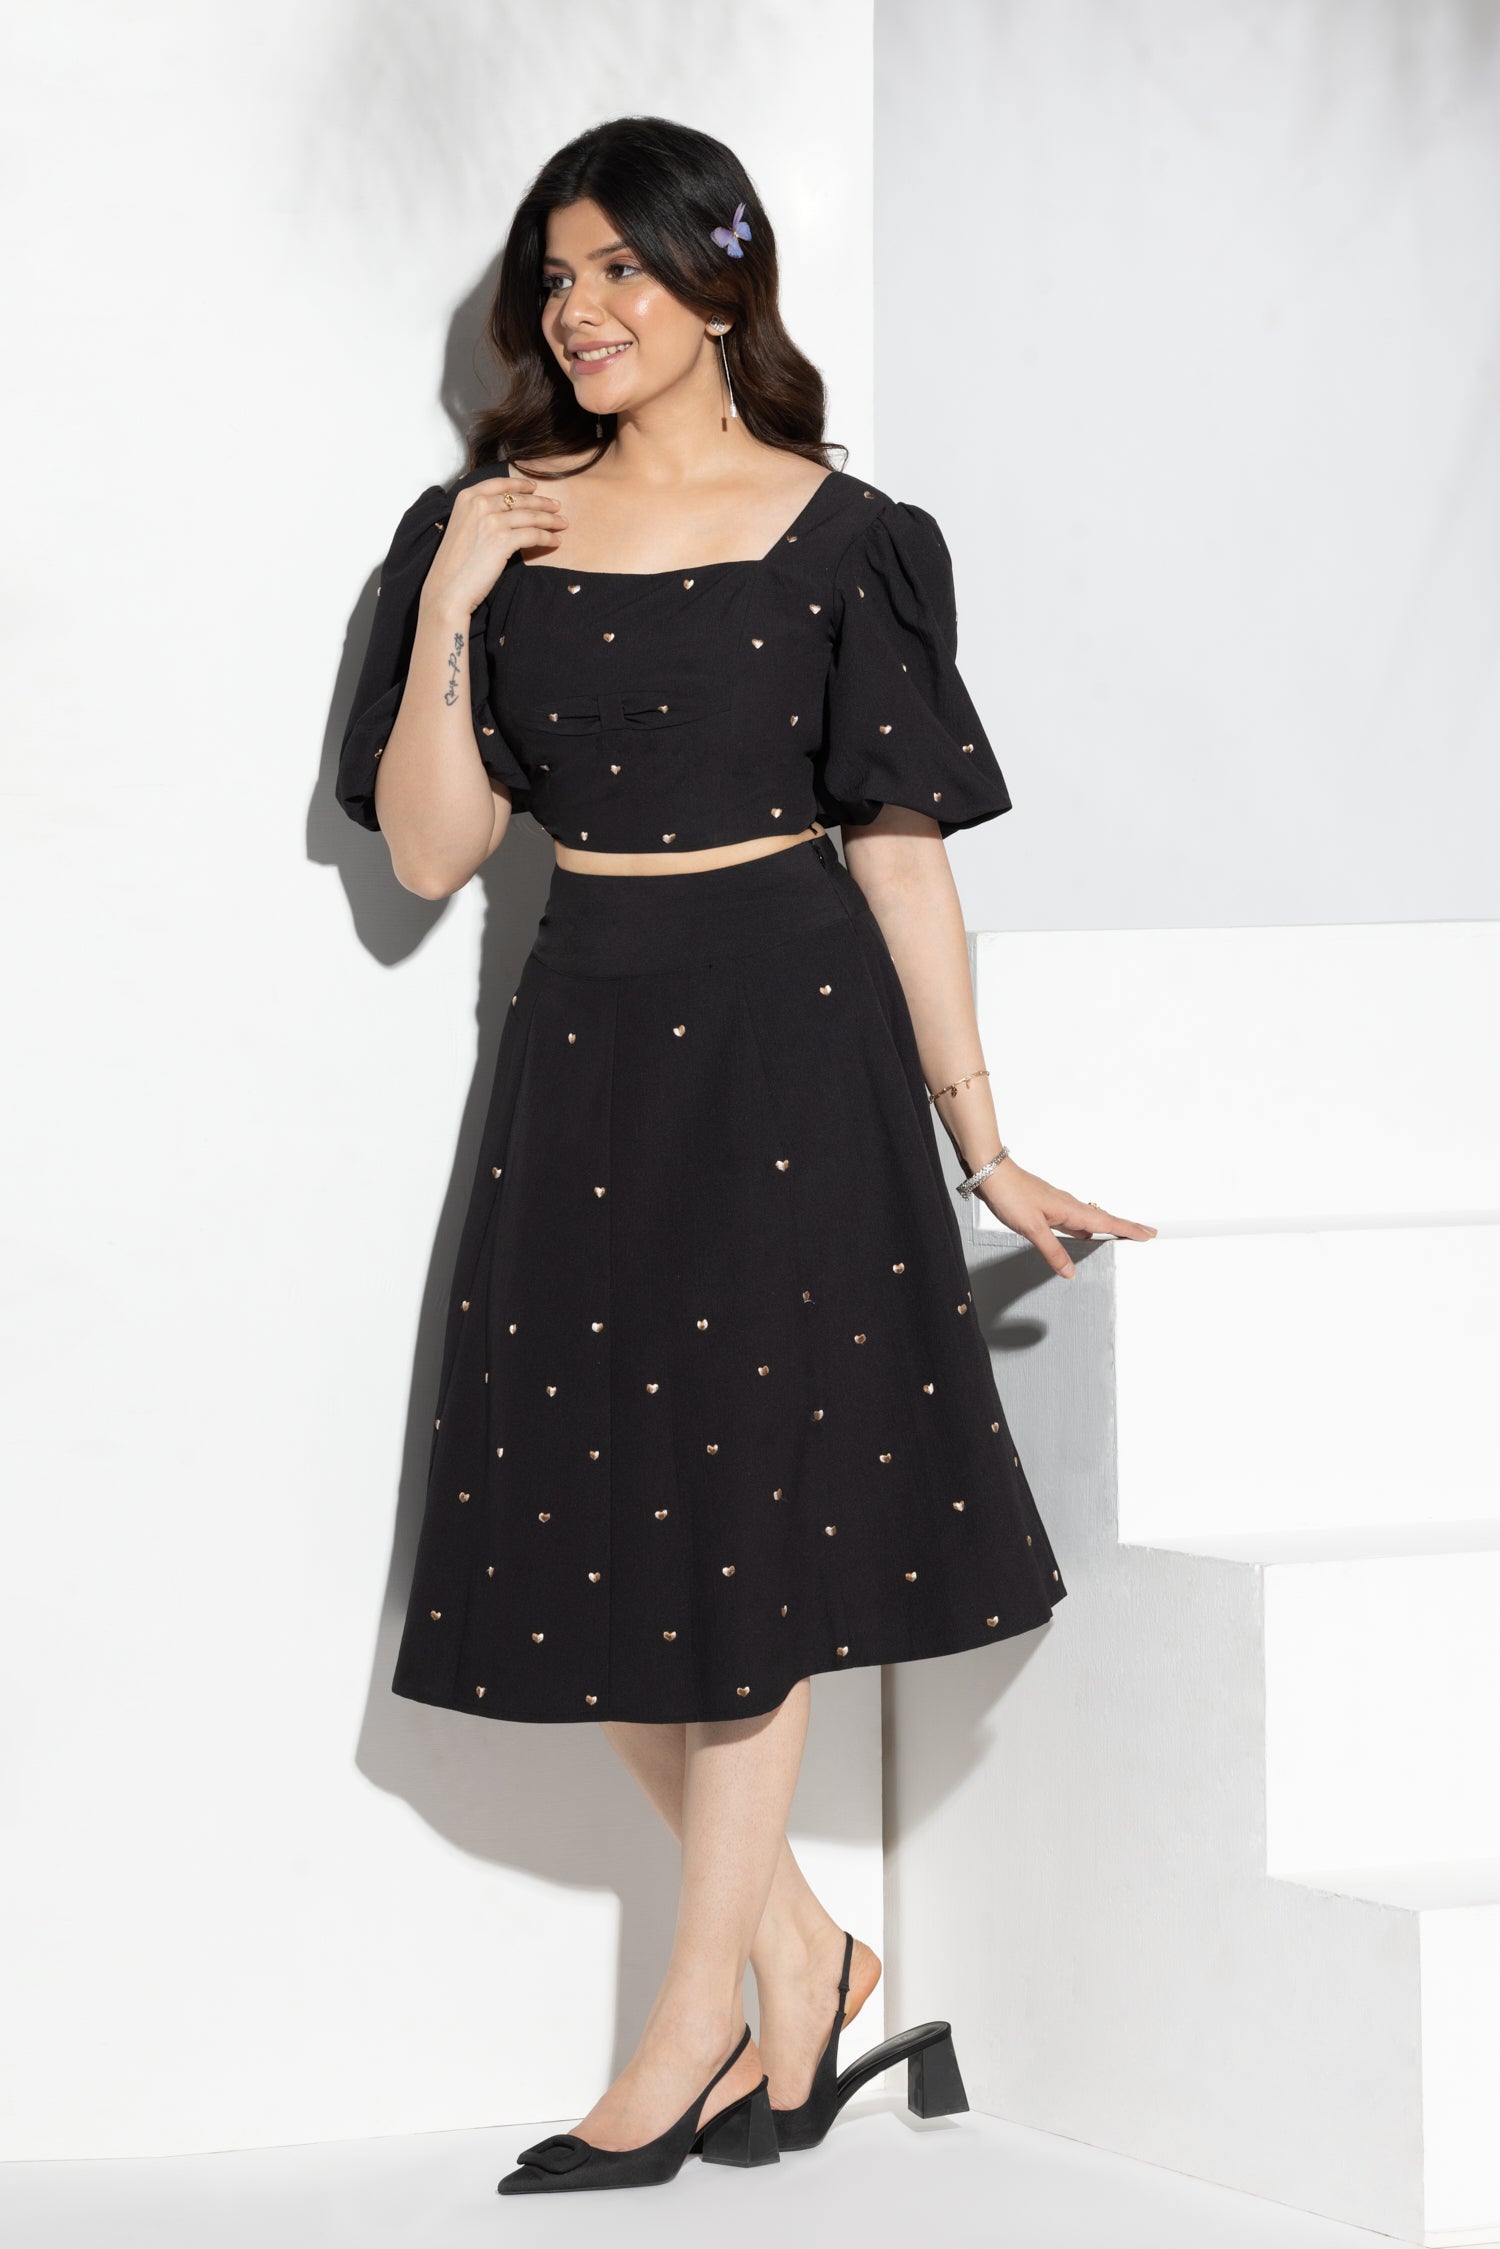 Black heart Smocked Crop Top (Puffed sleeves) with Skirt